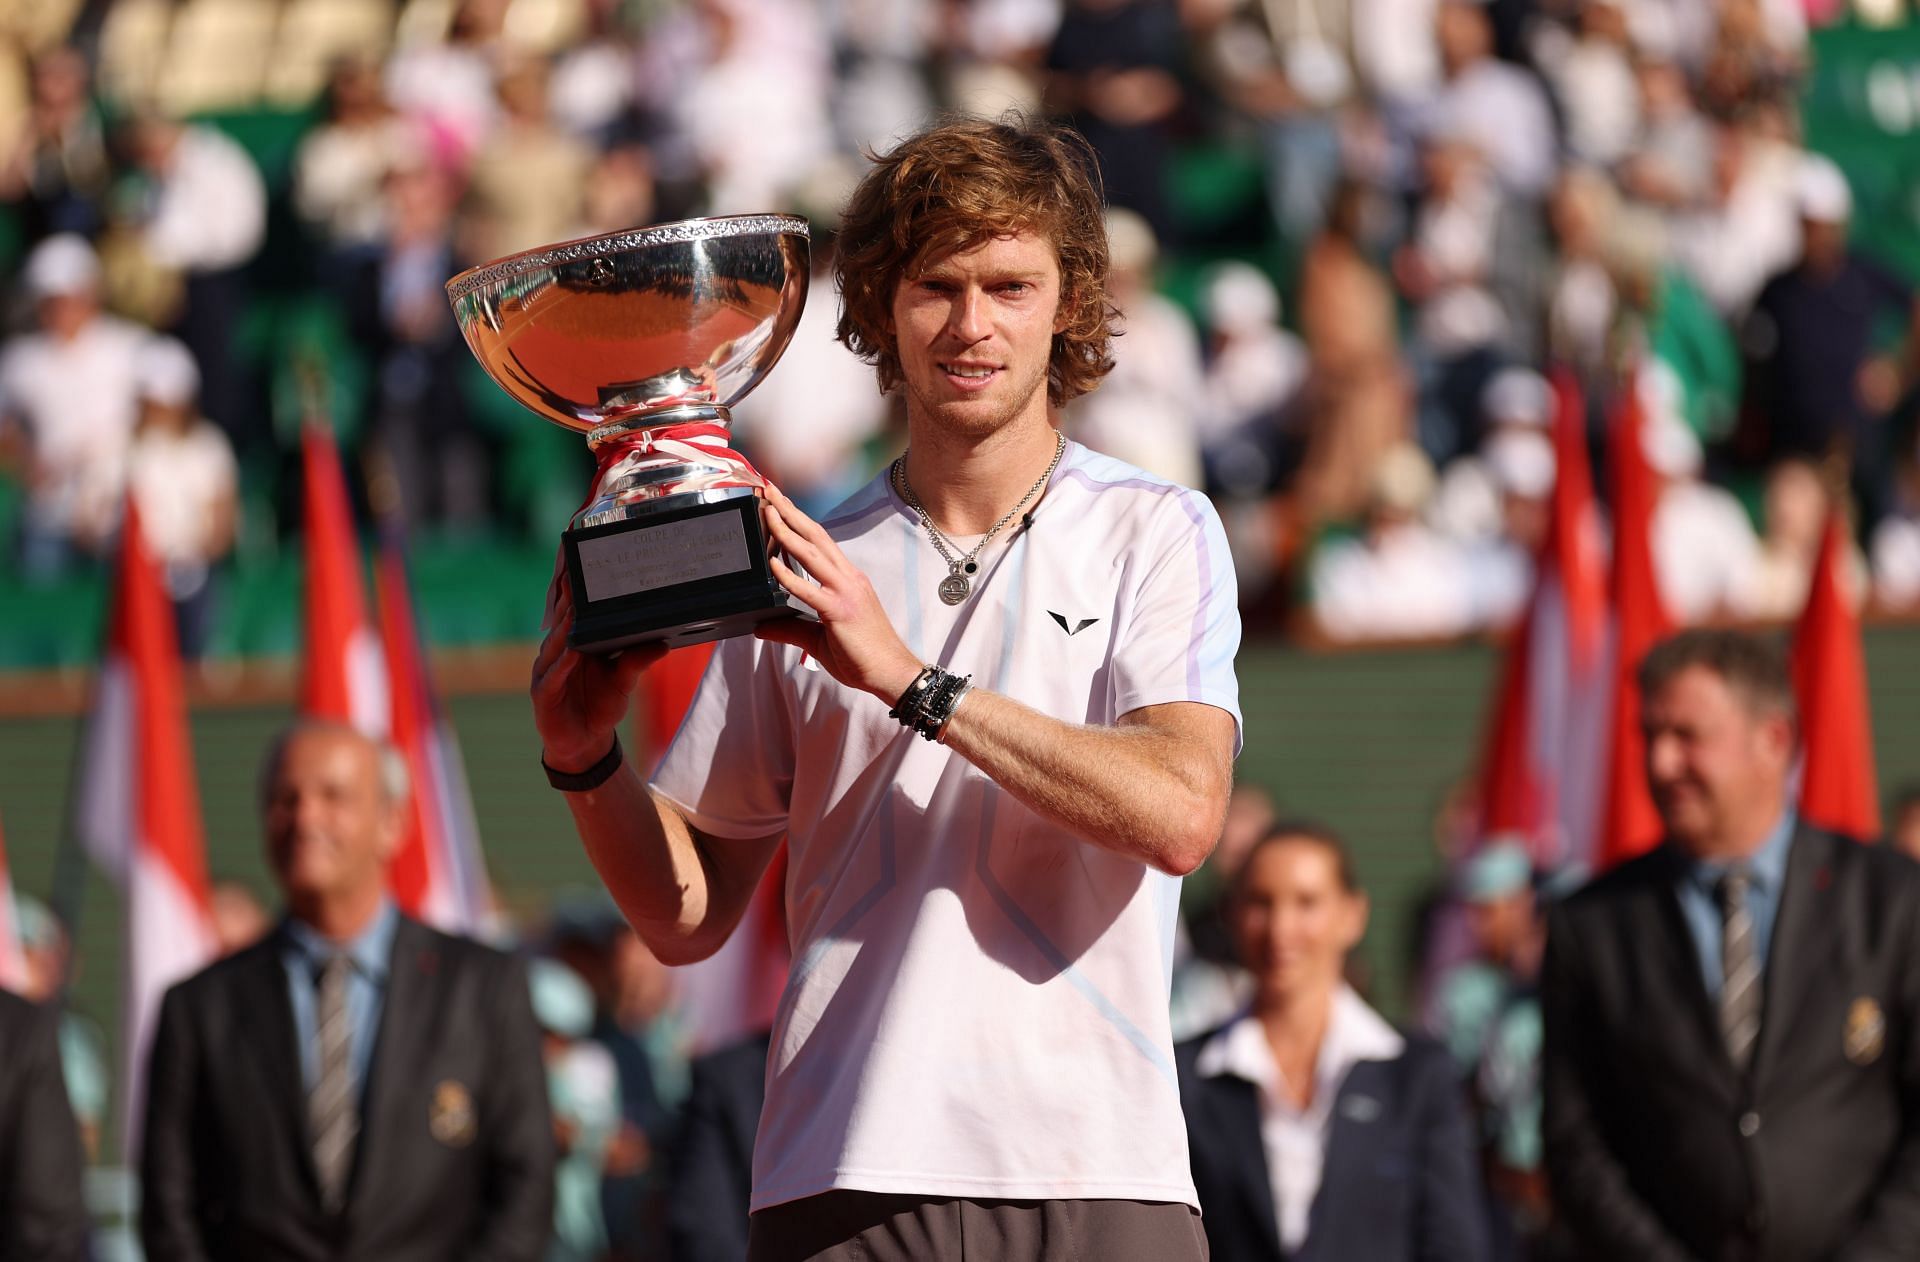 Andrey Rublev pictured after winning Monte-Carlo Masters